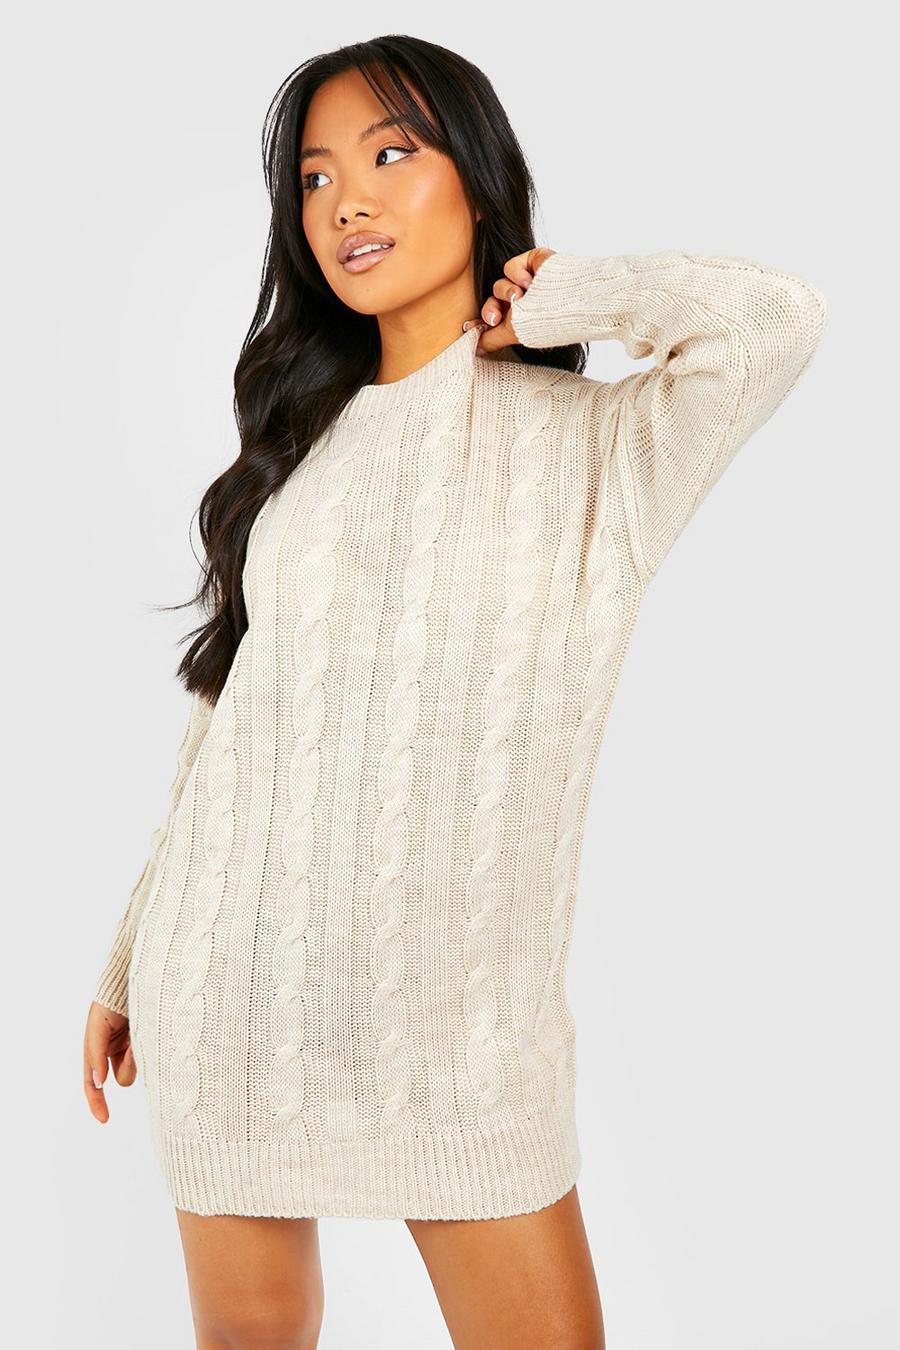 Oatmeal beige Petite Round Neck Cable Knit Jumper Dress